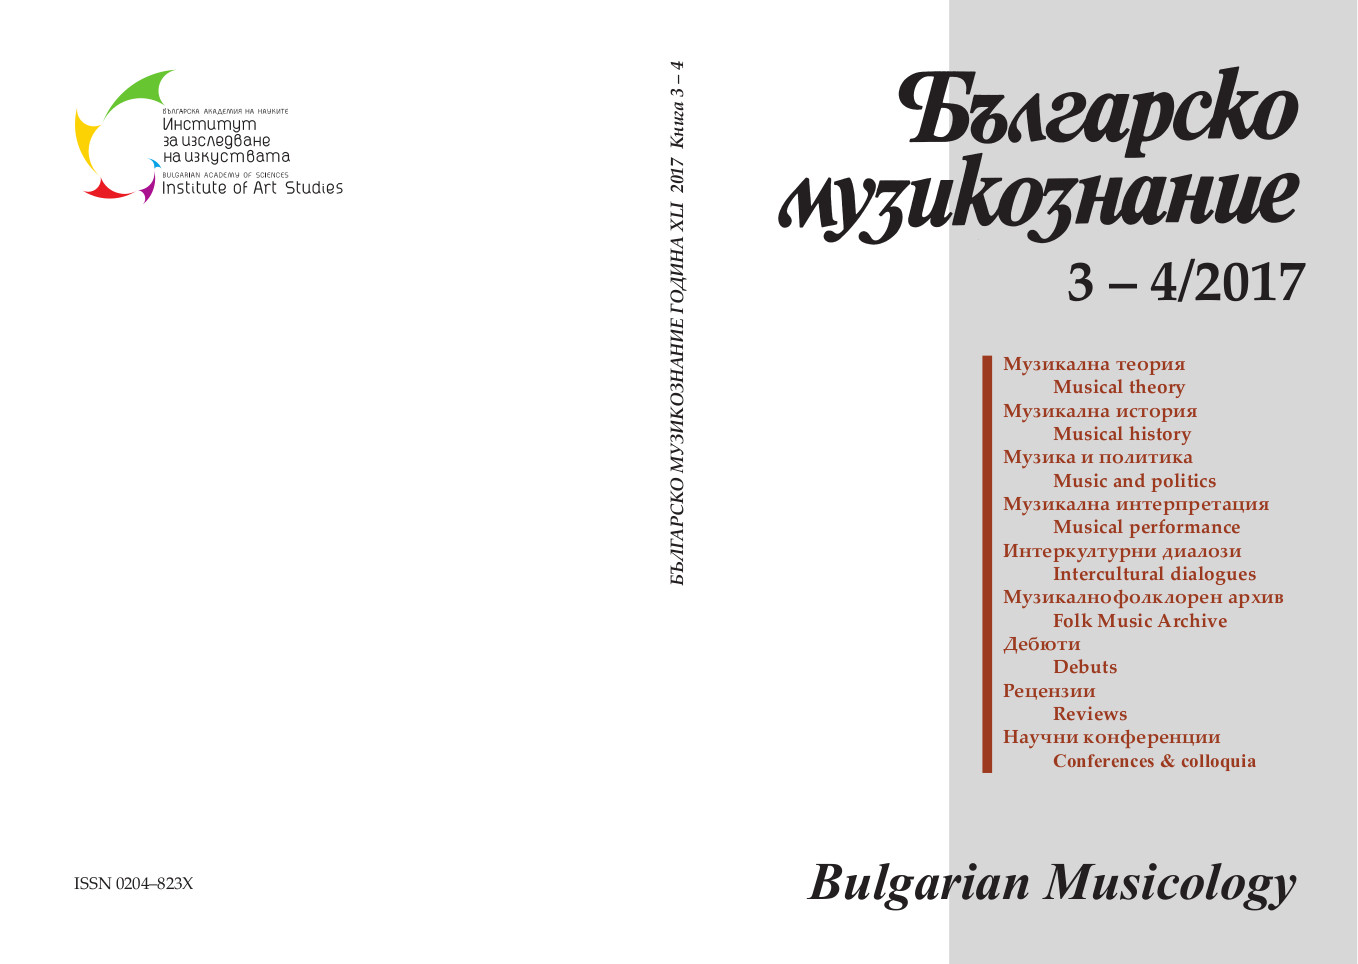 Recordings of folk music from the region of Kazanluk in the holdings of the Folk Music Archive, Institute of Art Studies Cover Image